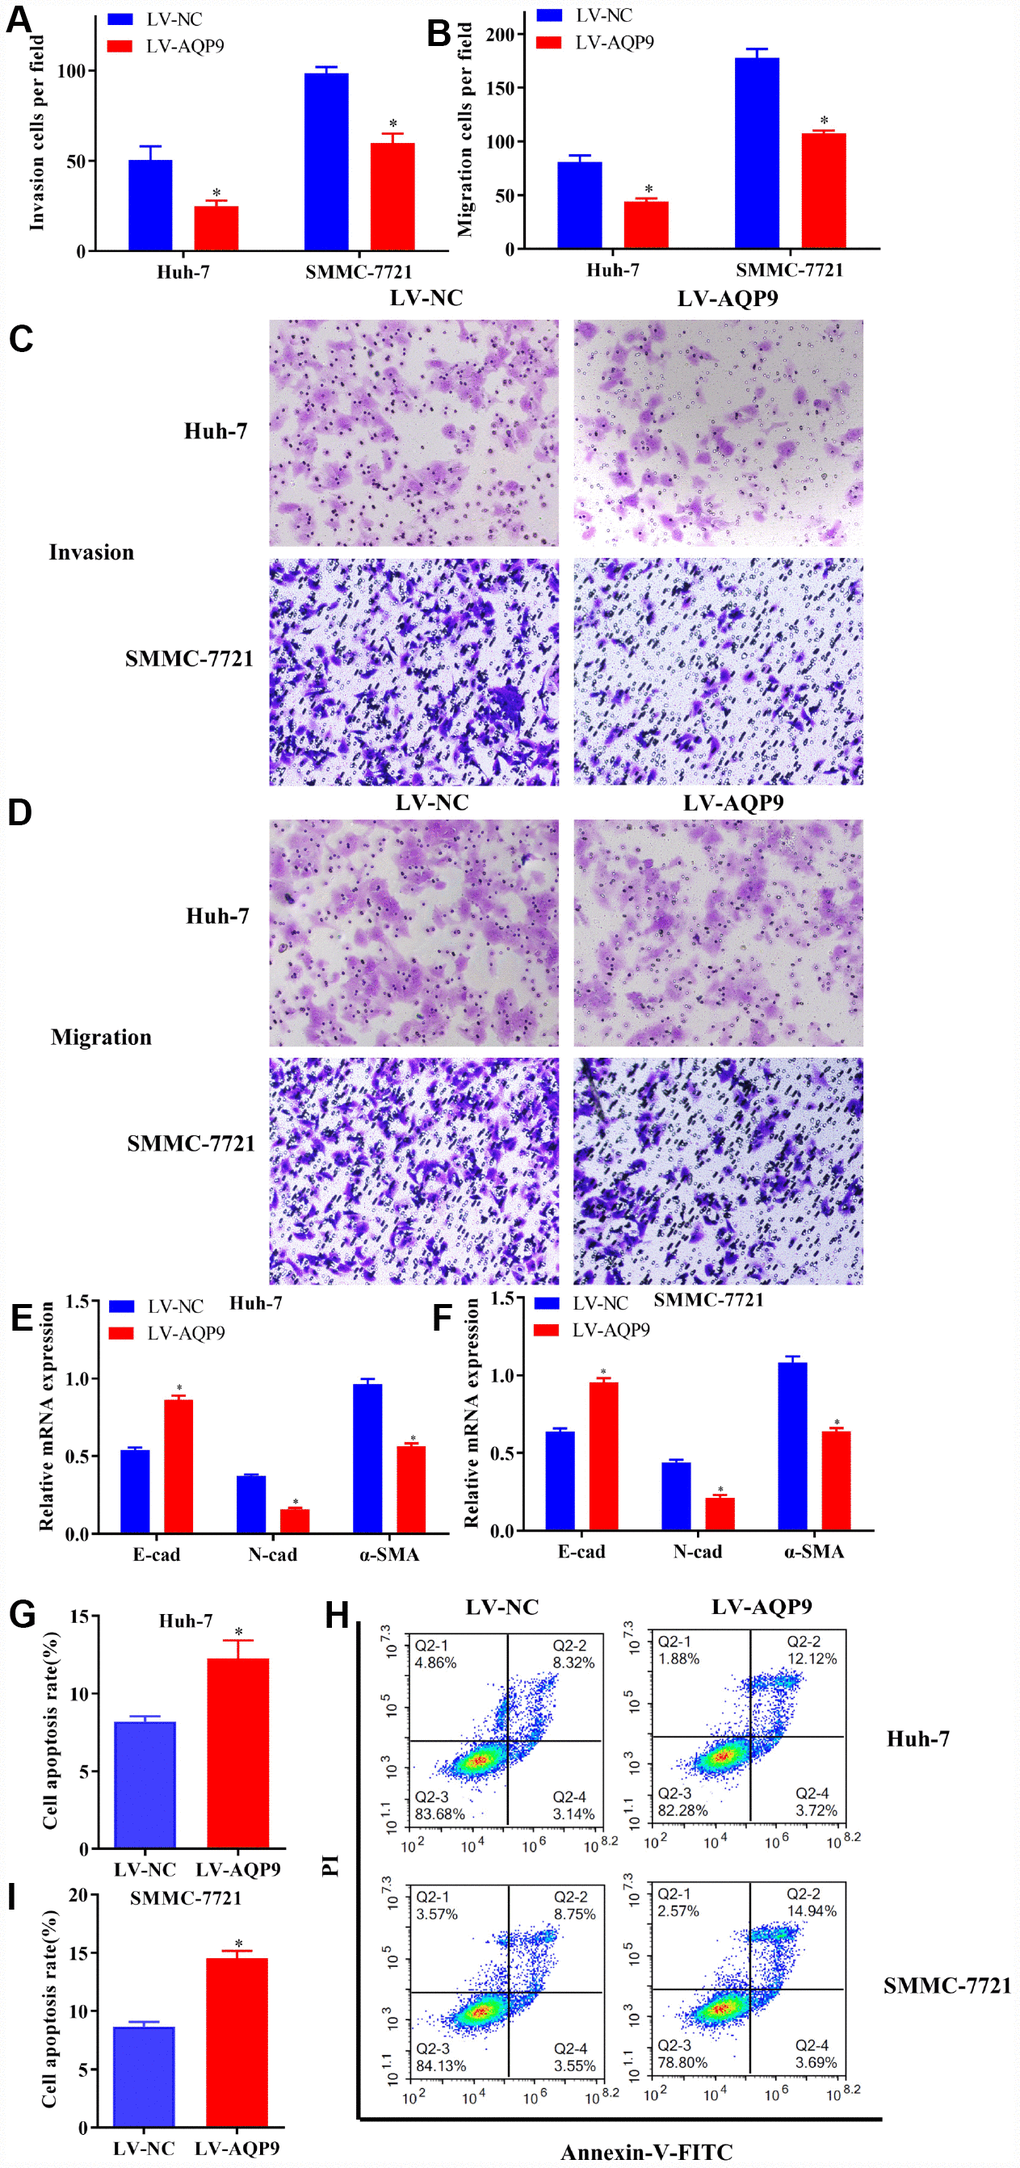 Overexpressed AQP9 inhibited invasion, migration and EMT in HCC cells, but promoted cell apoptosis. (A and C) The invasive abilities in Huh-7 and SMMC-7721 cells transfected with LV-NC or LV-AQP9 were determined by Transwell assay (magnificationx100). (B and D) Cell migration were examined following the transfection of LV-AQP9 (magnificationx100). (E and F) The mRNA levels of E-cad, N-cad and α-SMA in transfected Huh-7 and SMMC-7721 cells were evaluated using RT-qPCR. (G–I) The cell apoptosis rate in HCC cells transfected with LV-NC or LV-AQP9 was analyzed by flow cytometry. Data are shown as mean ± SD based on at least three independent experiments. The results were represented as mean ± SD. P